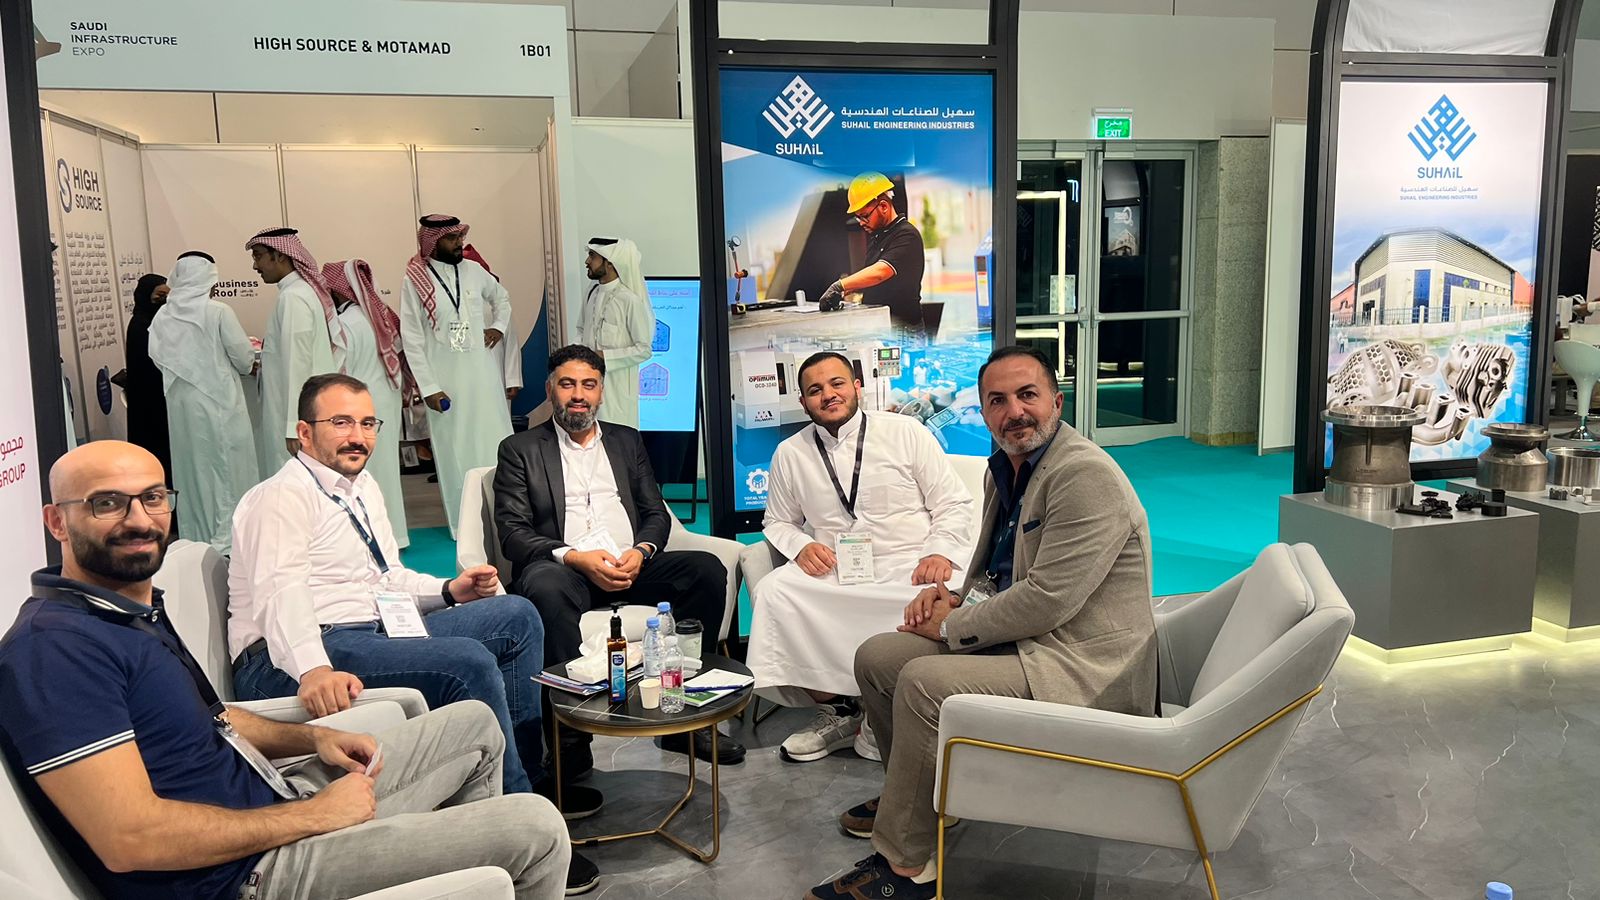 Suhail participated in the Saudi Infrastructure Exhibition